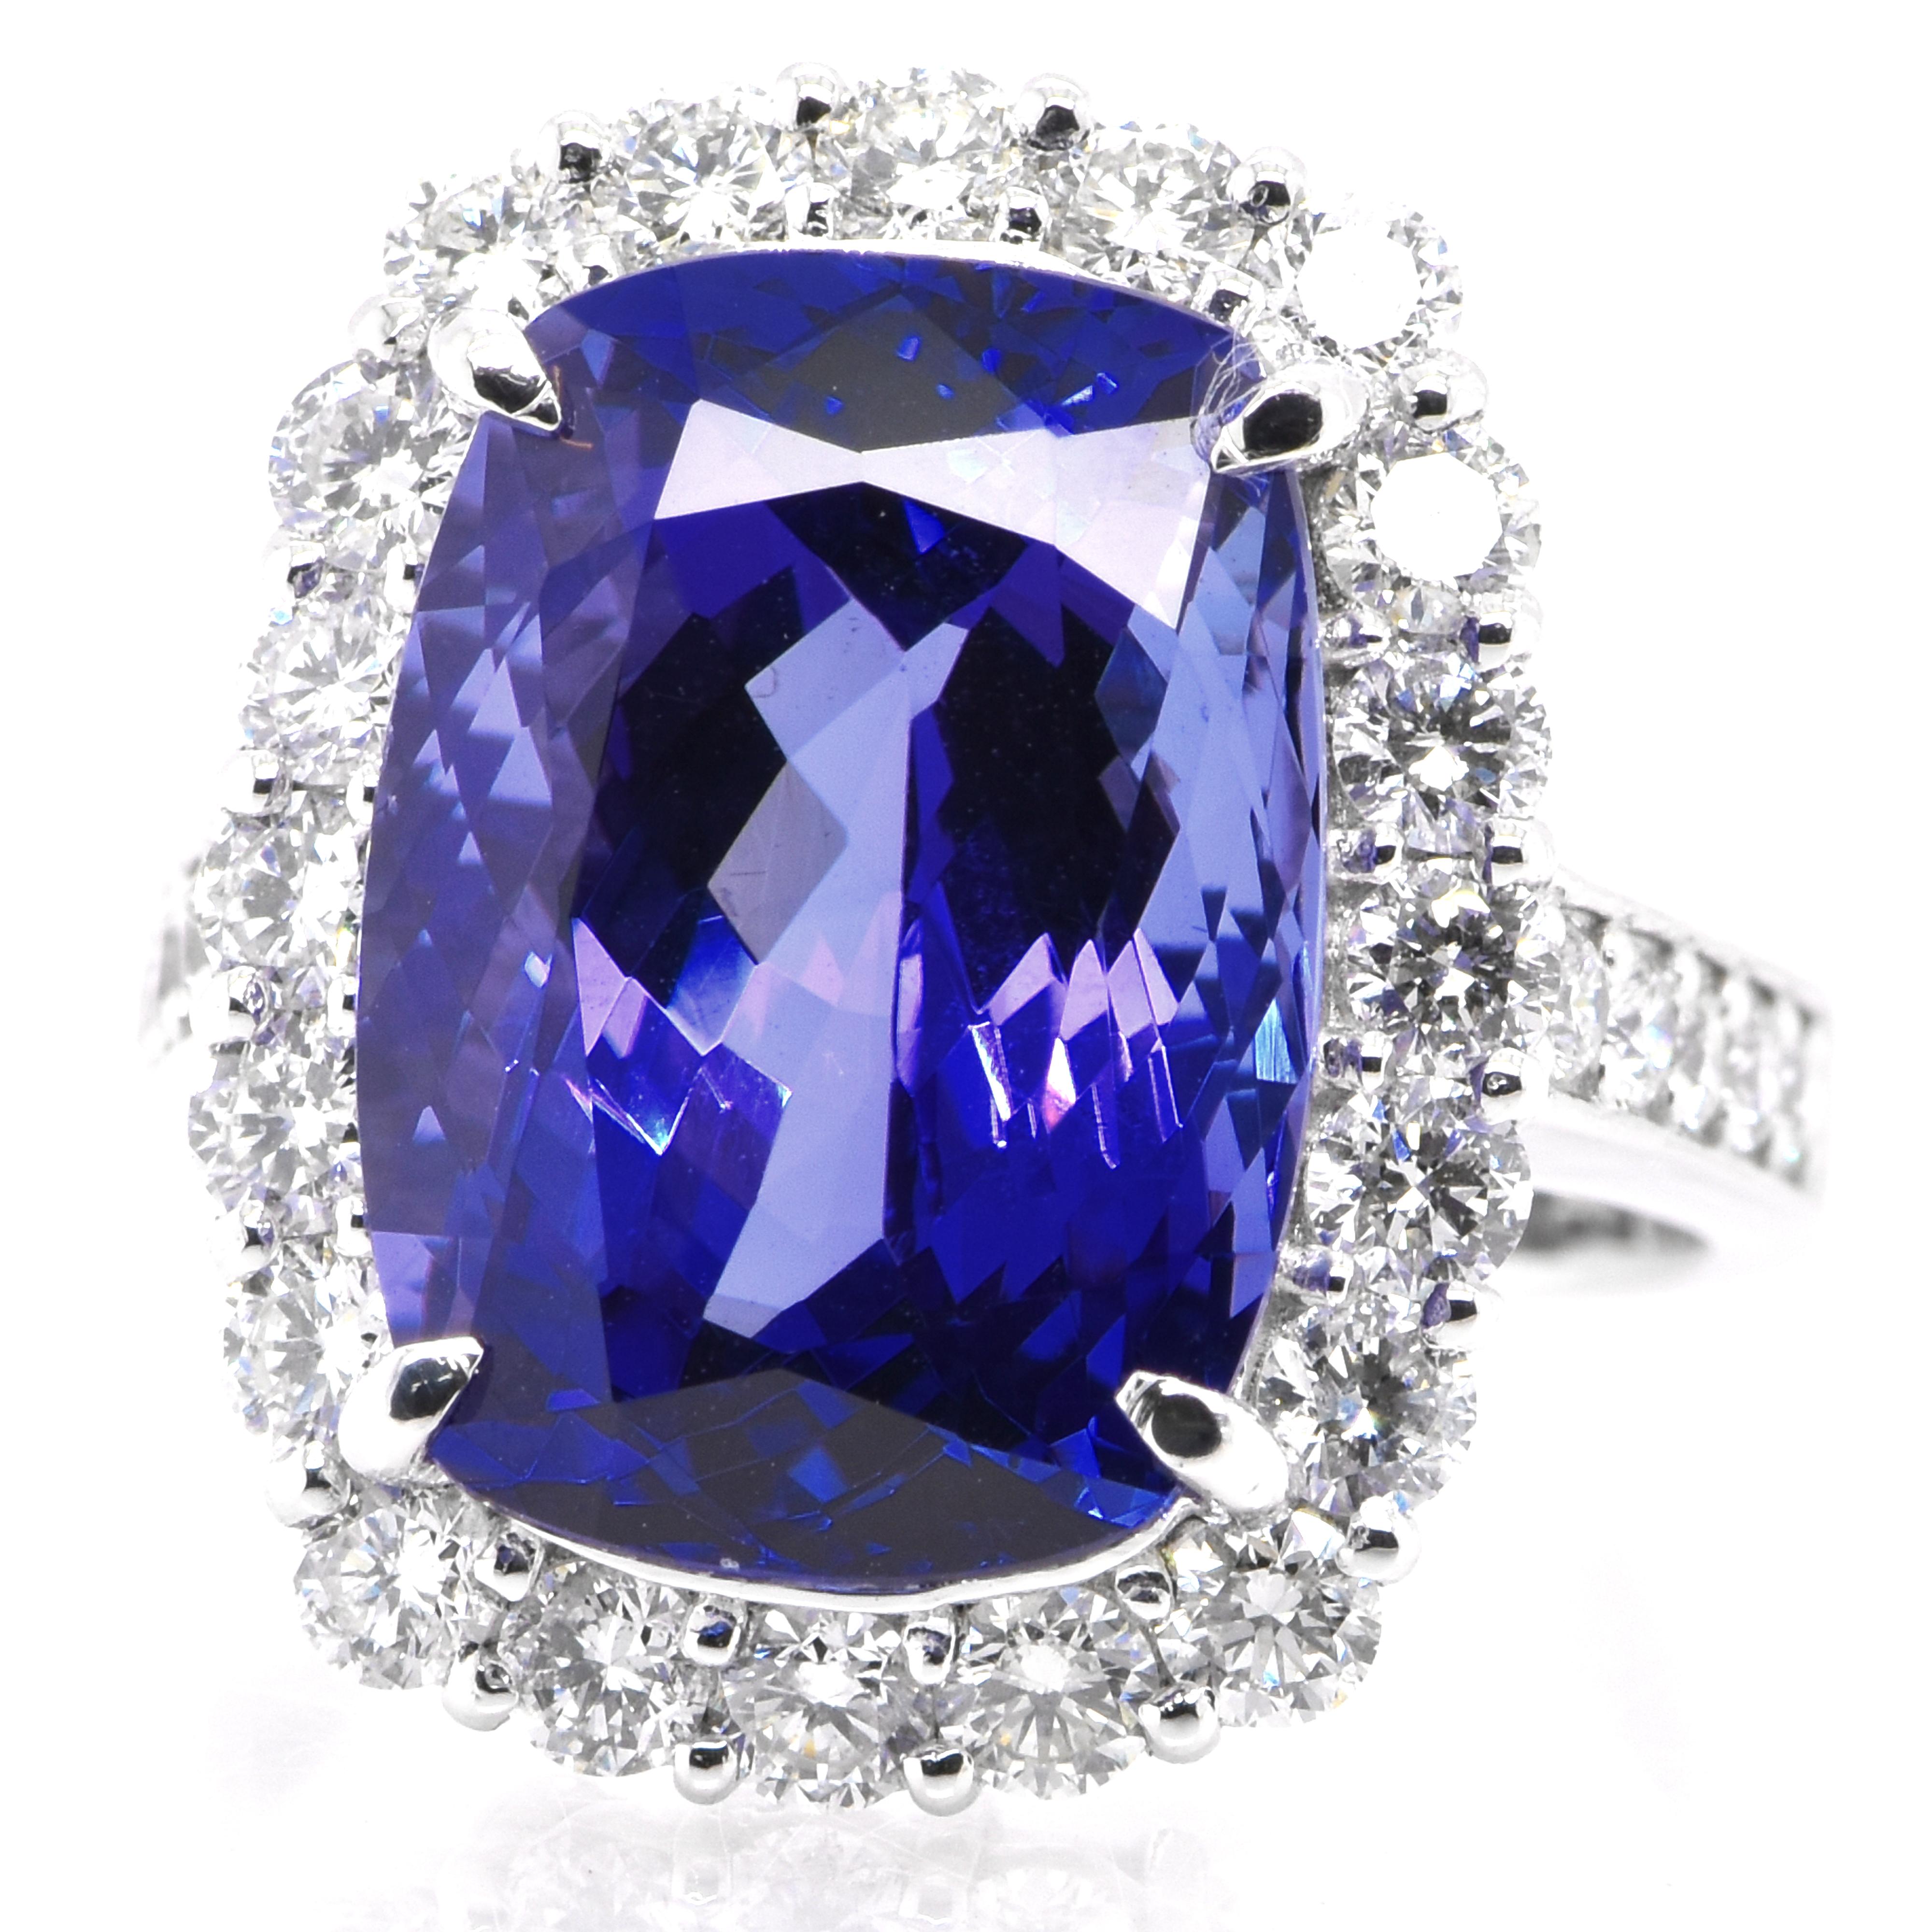 A beautiful ring featuring a 9.60 Carat Natural Tanzanite and 1.45 Carats Diamond Accents set in Platinum. Tanzanite's name was given by Tiffany and Co after its only known source: Tanzania. Tanzanite displays beautiful pleochroic colors meaning